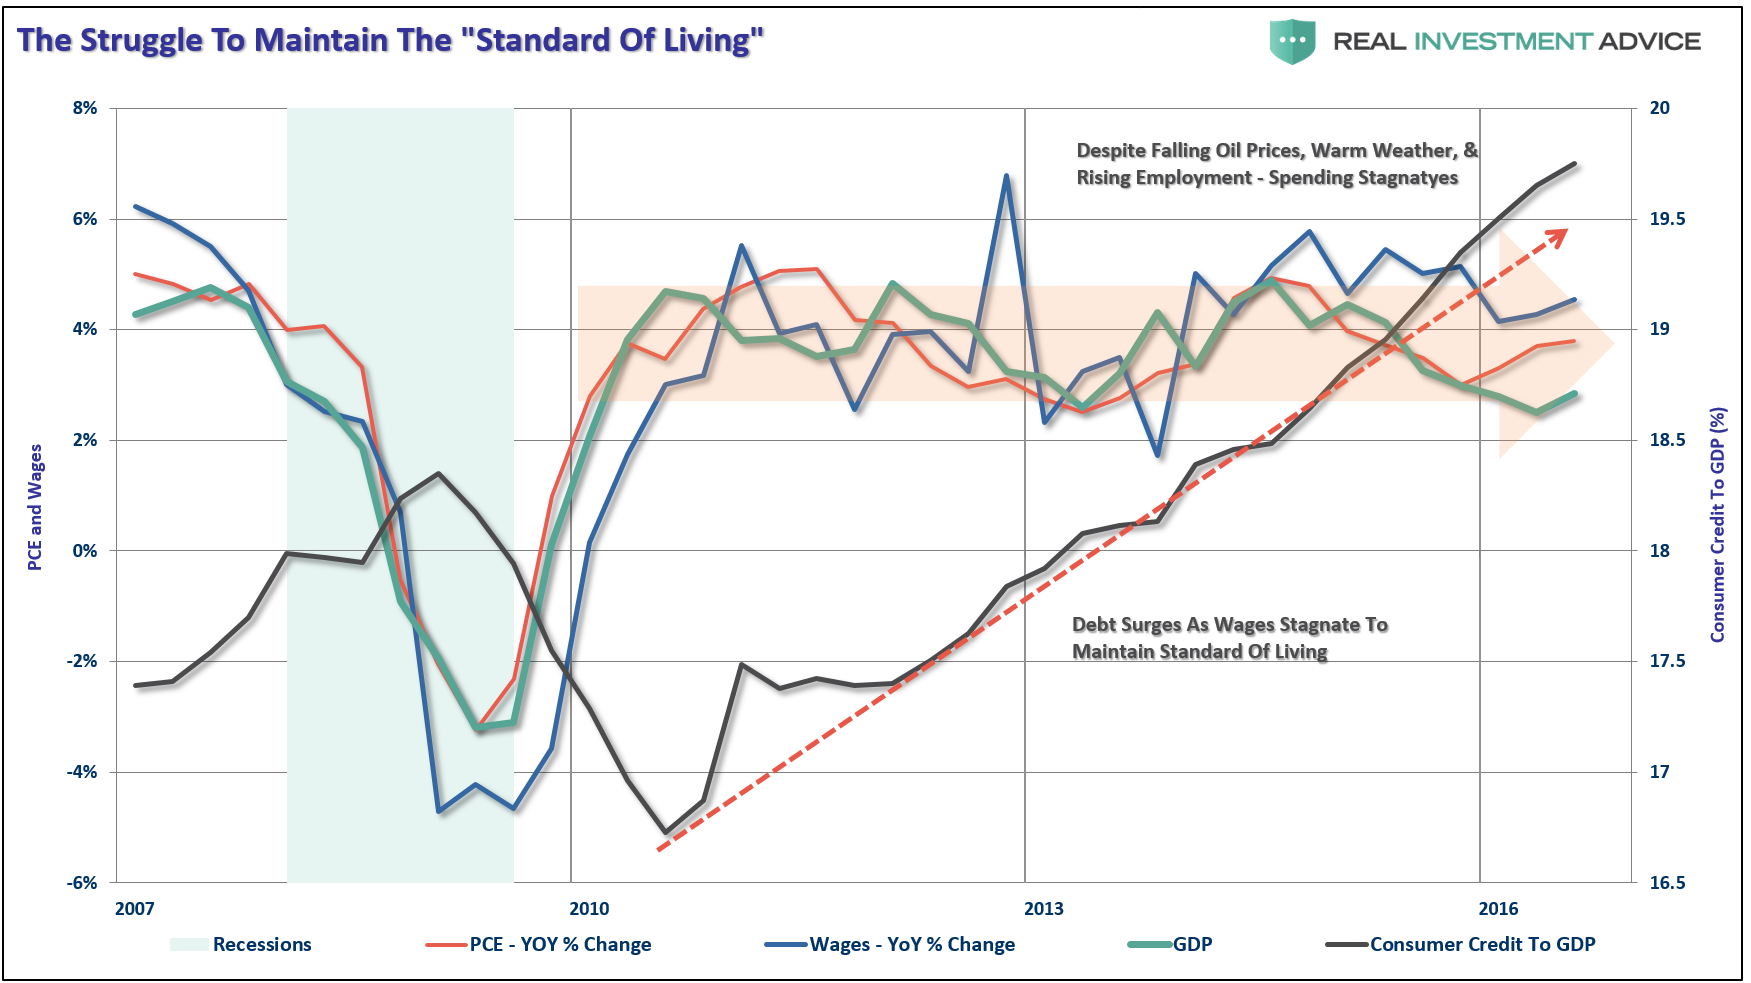 The Struggle to Maintain the Standard of Living 2007-2017